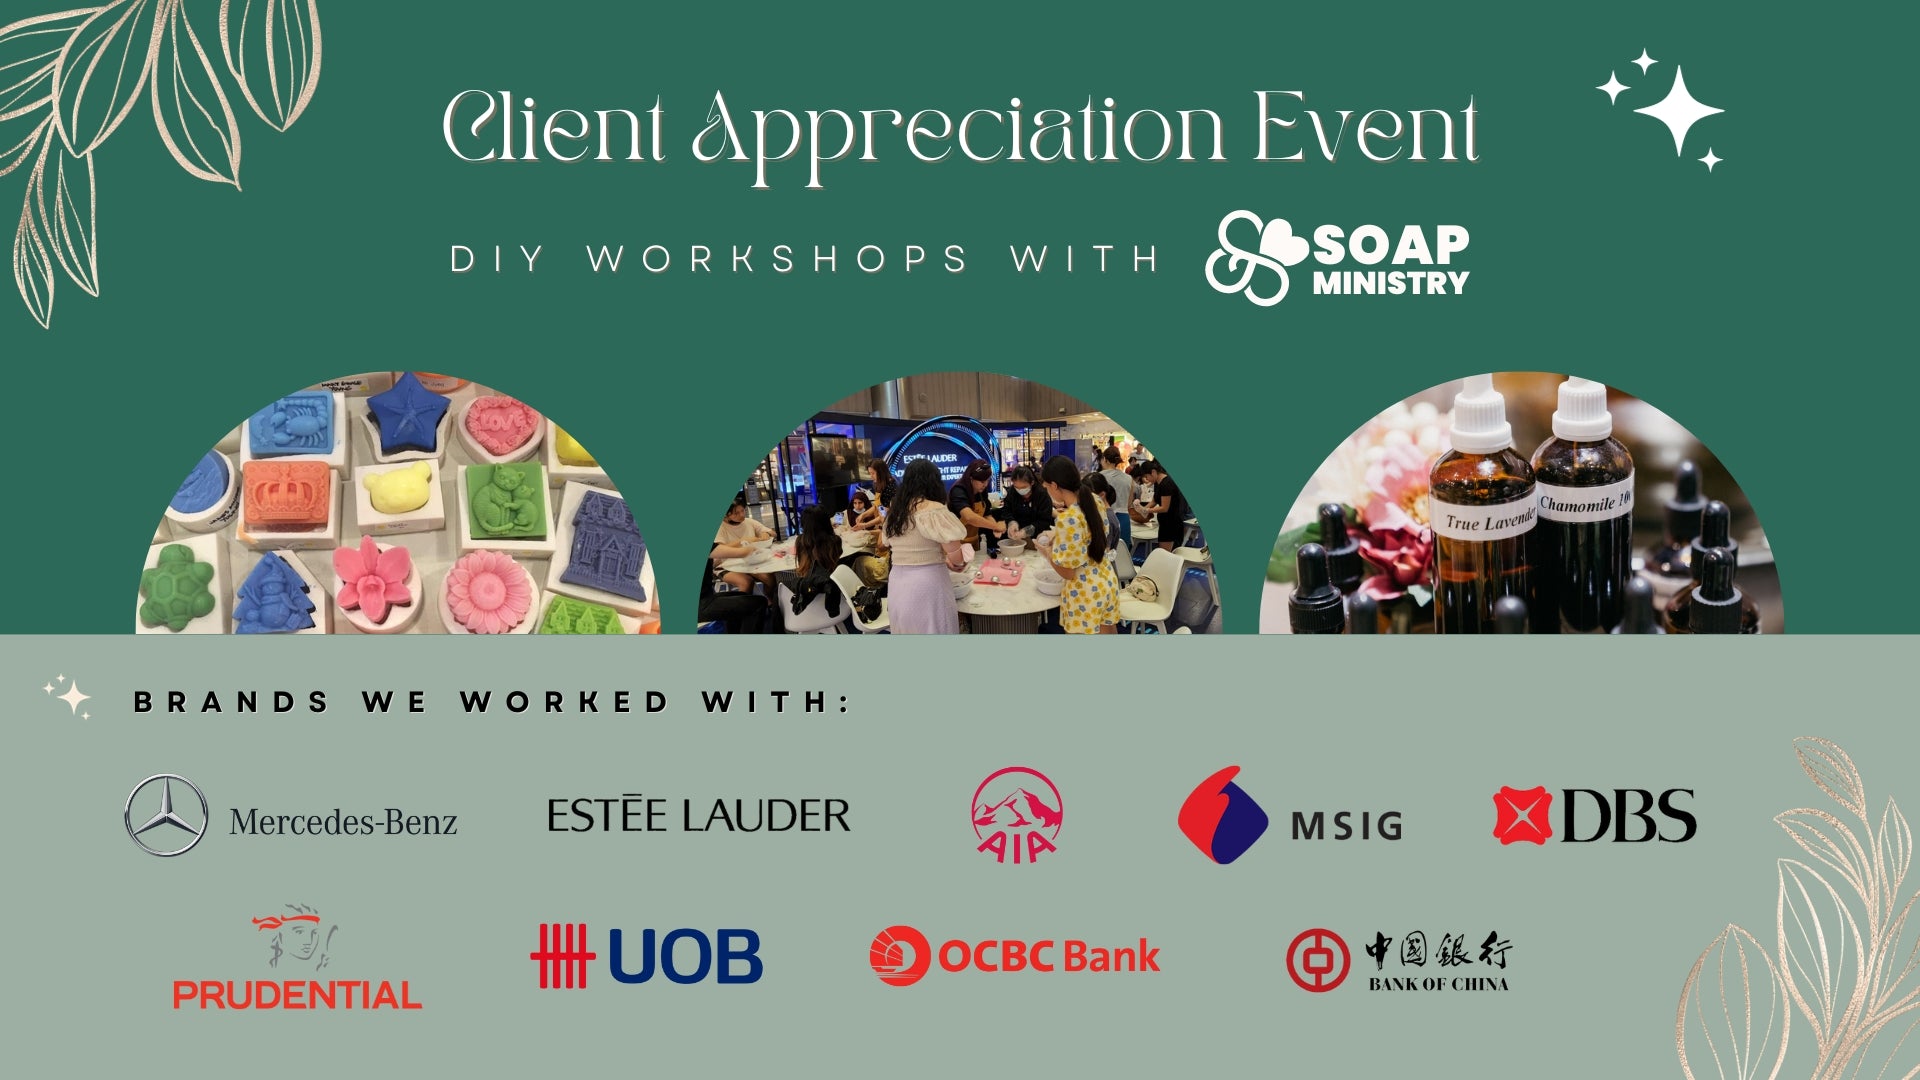 Client Appreciation Events with Soap Ministry